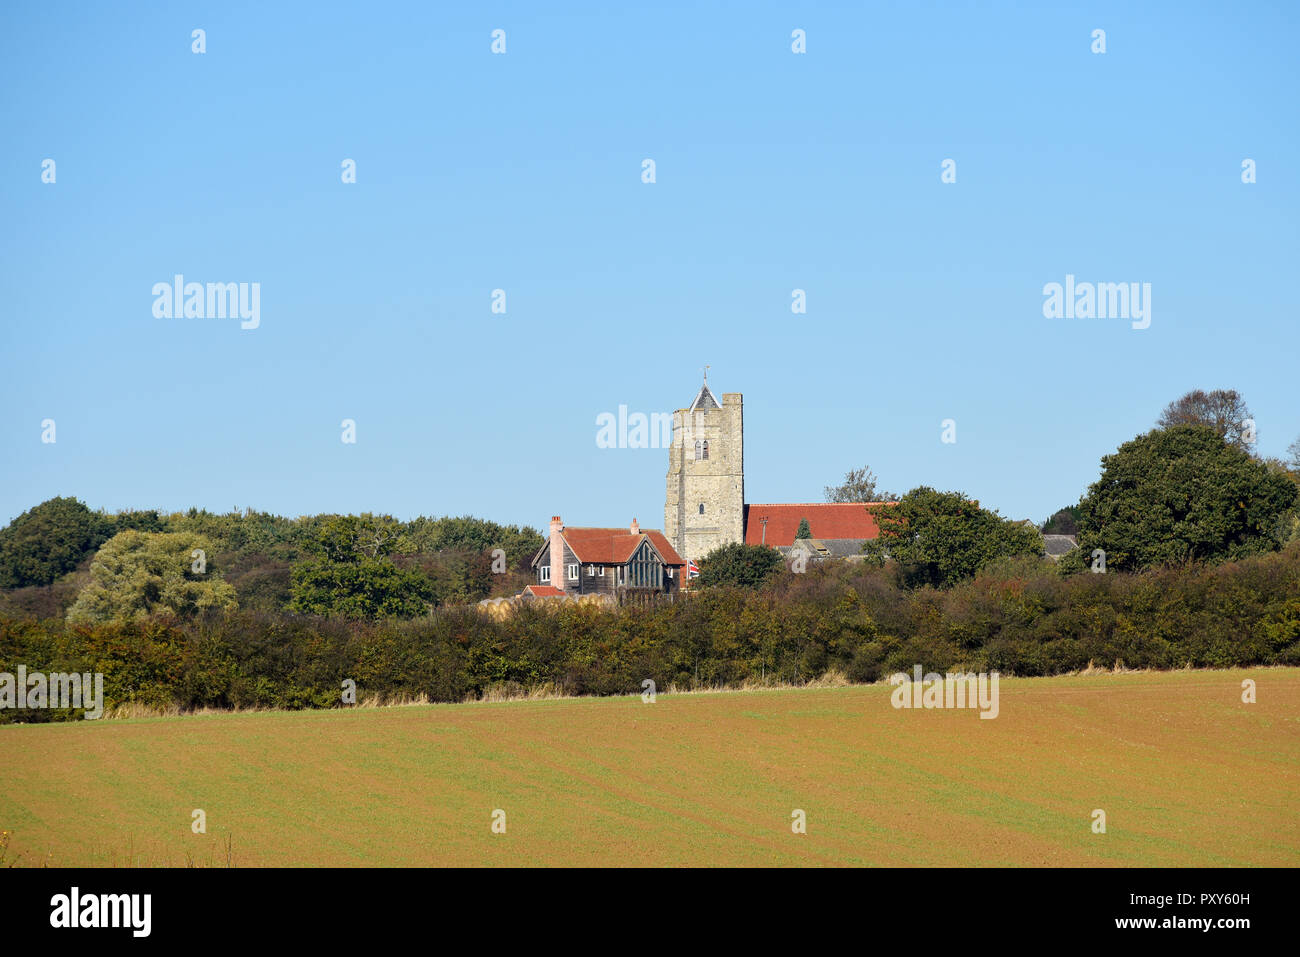 All Saints Church, Rettendon, Essex, UK. English countryside with field, hedges and trees. Blue sky with copyspace Stock Photo